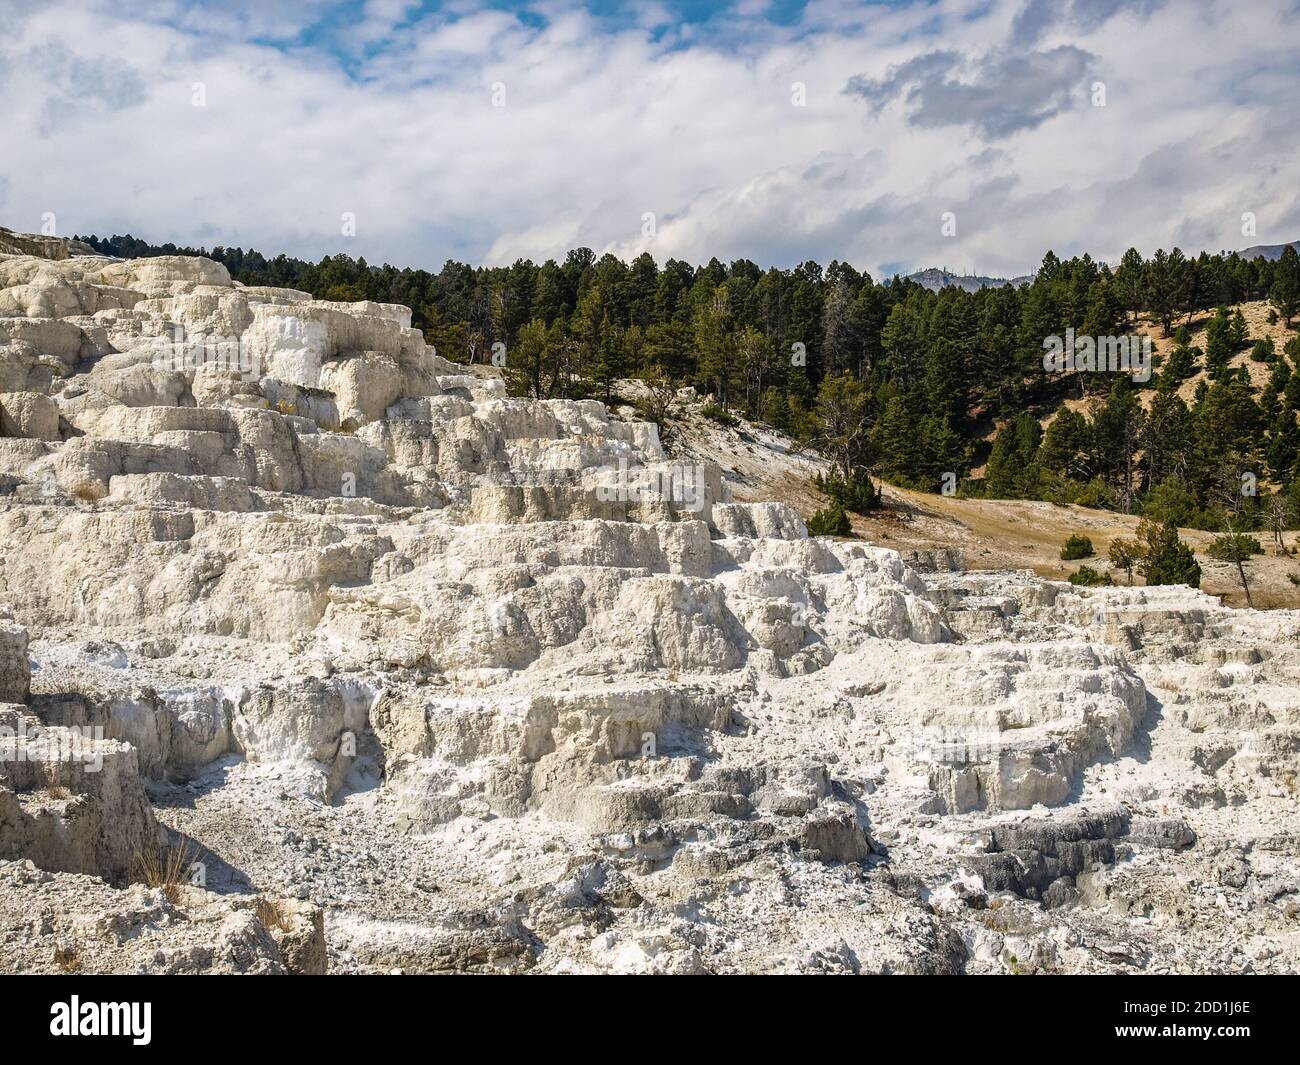 Sulfur deposits ont he hills near Mammoth hot springs, Yellowstone National Park, MO, USA Stock Photo